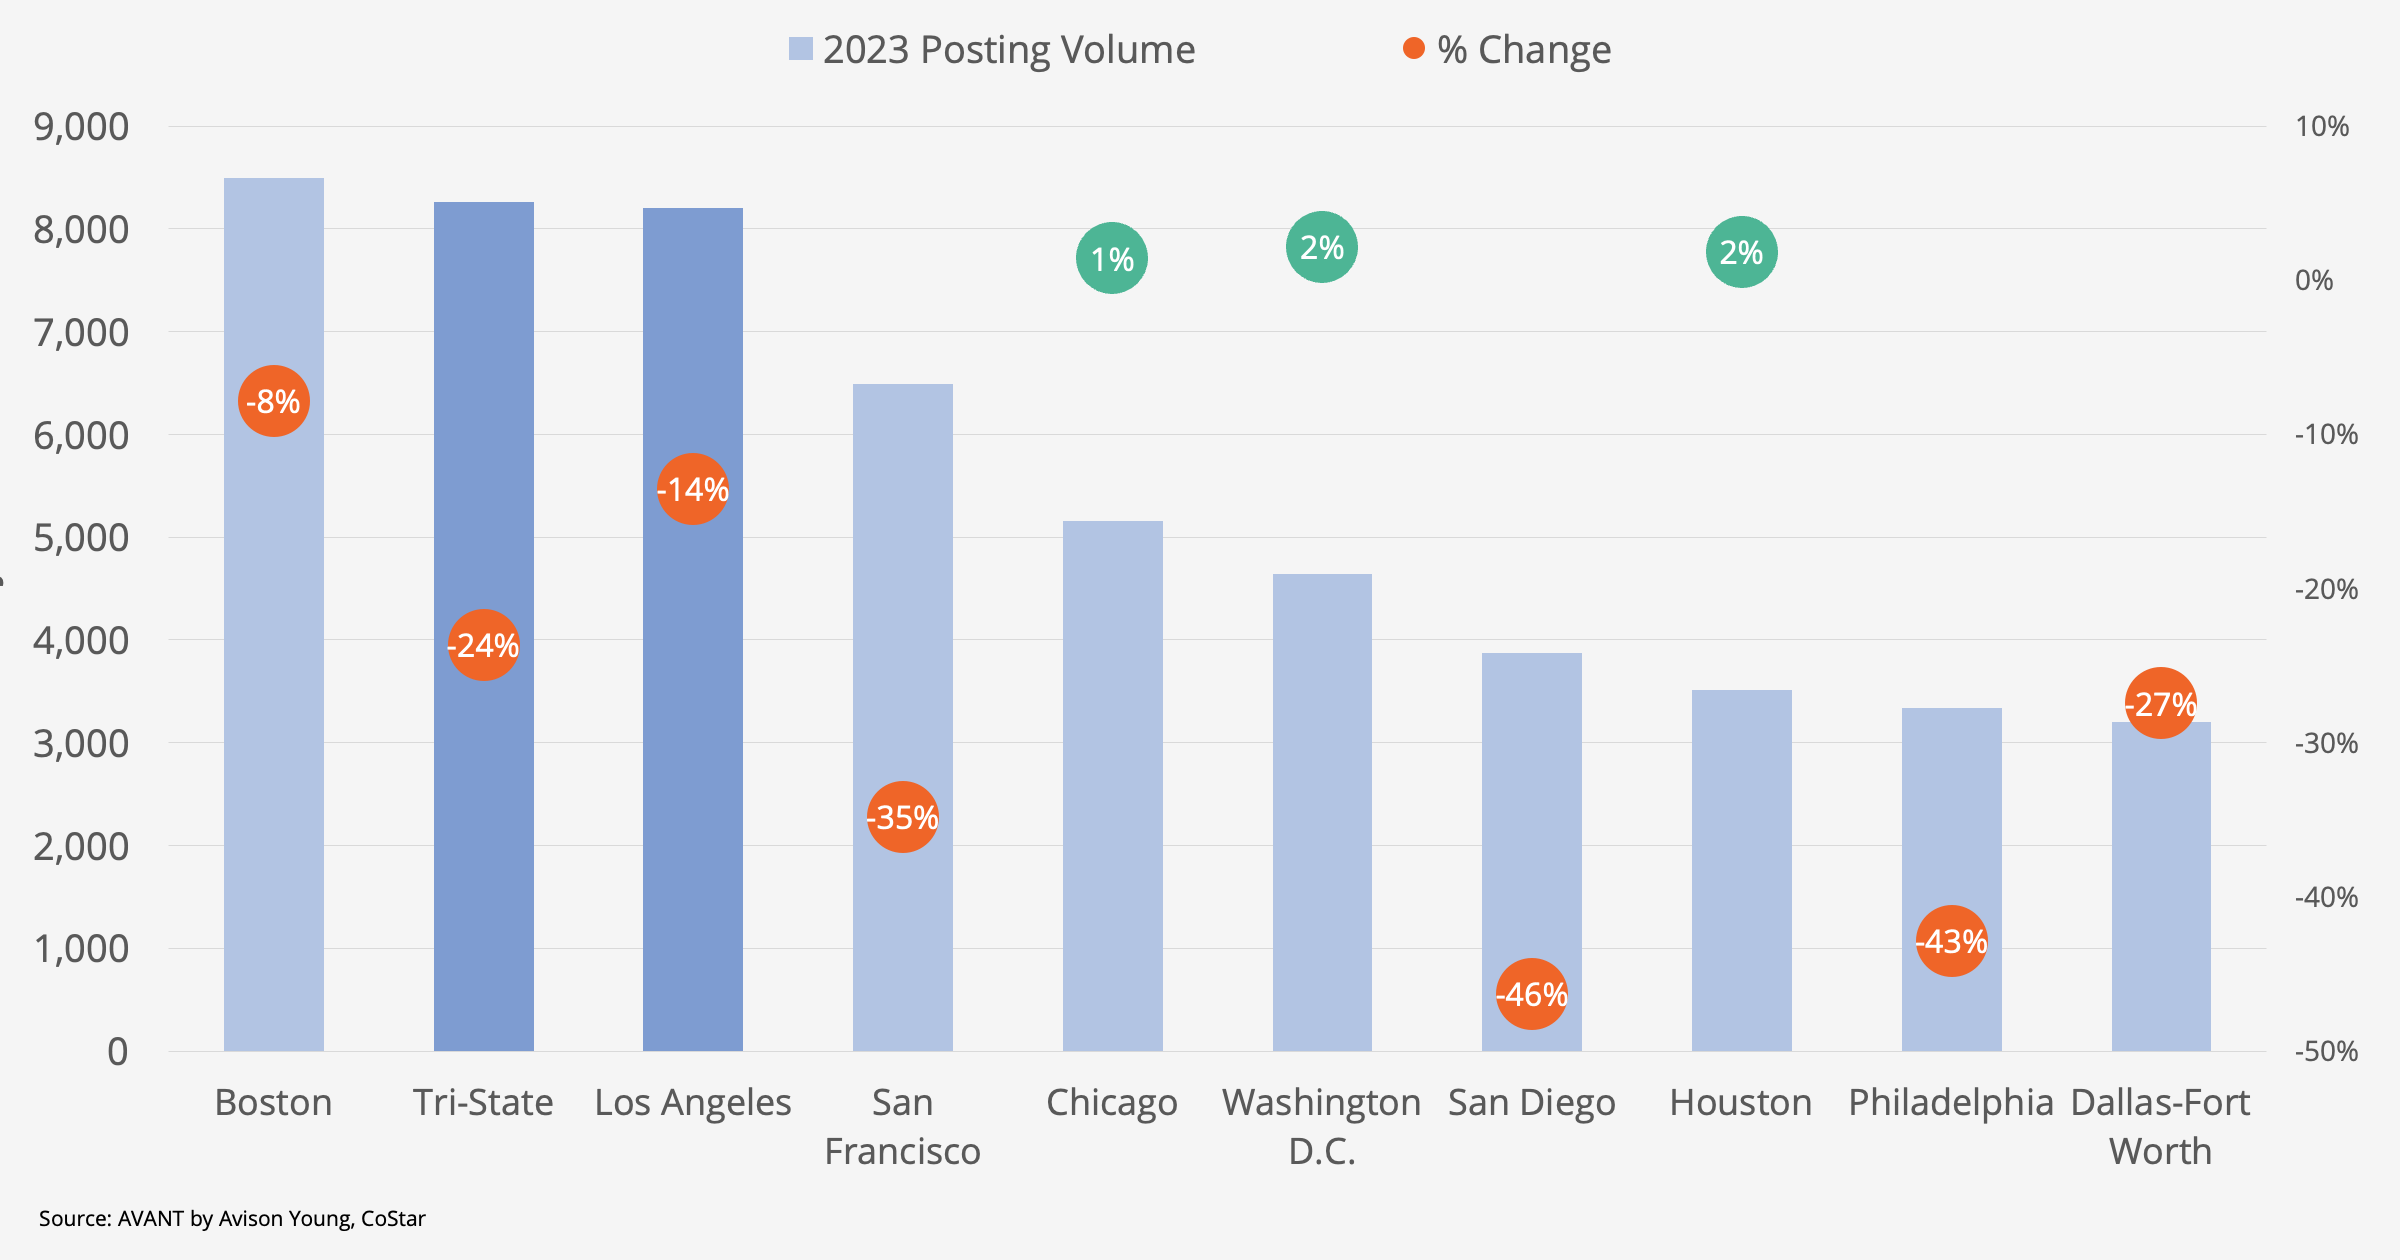 Chart showing 2023 job posting volume and year over year change for large US metropolitan areas.